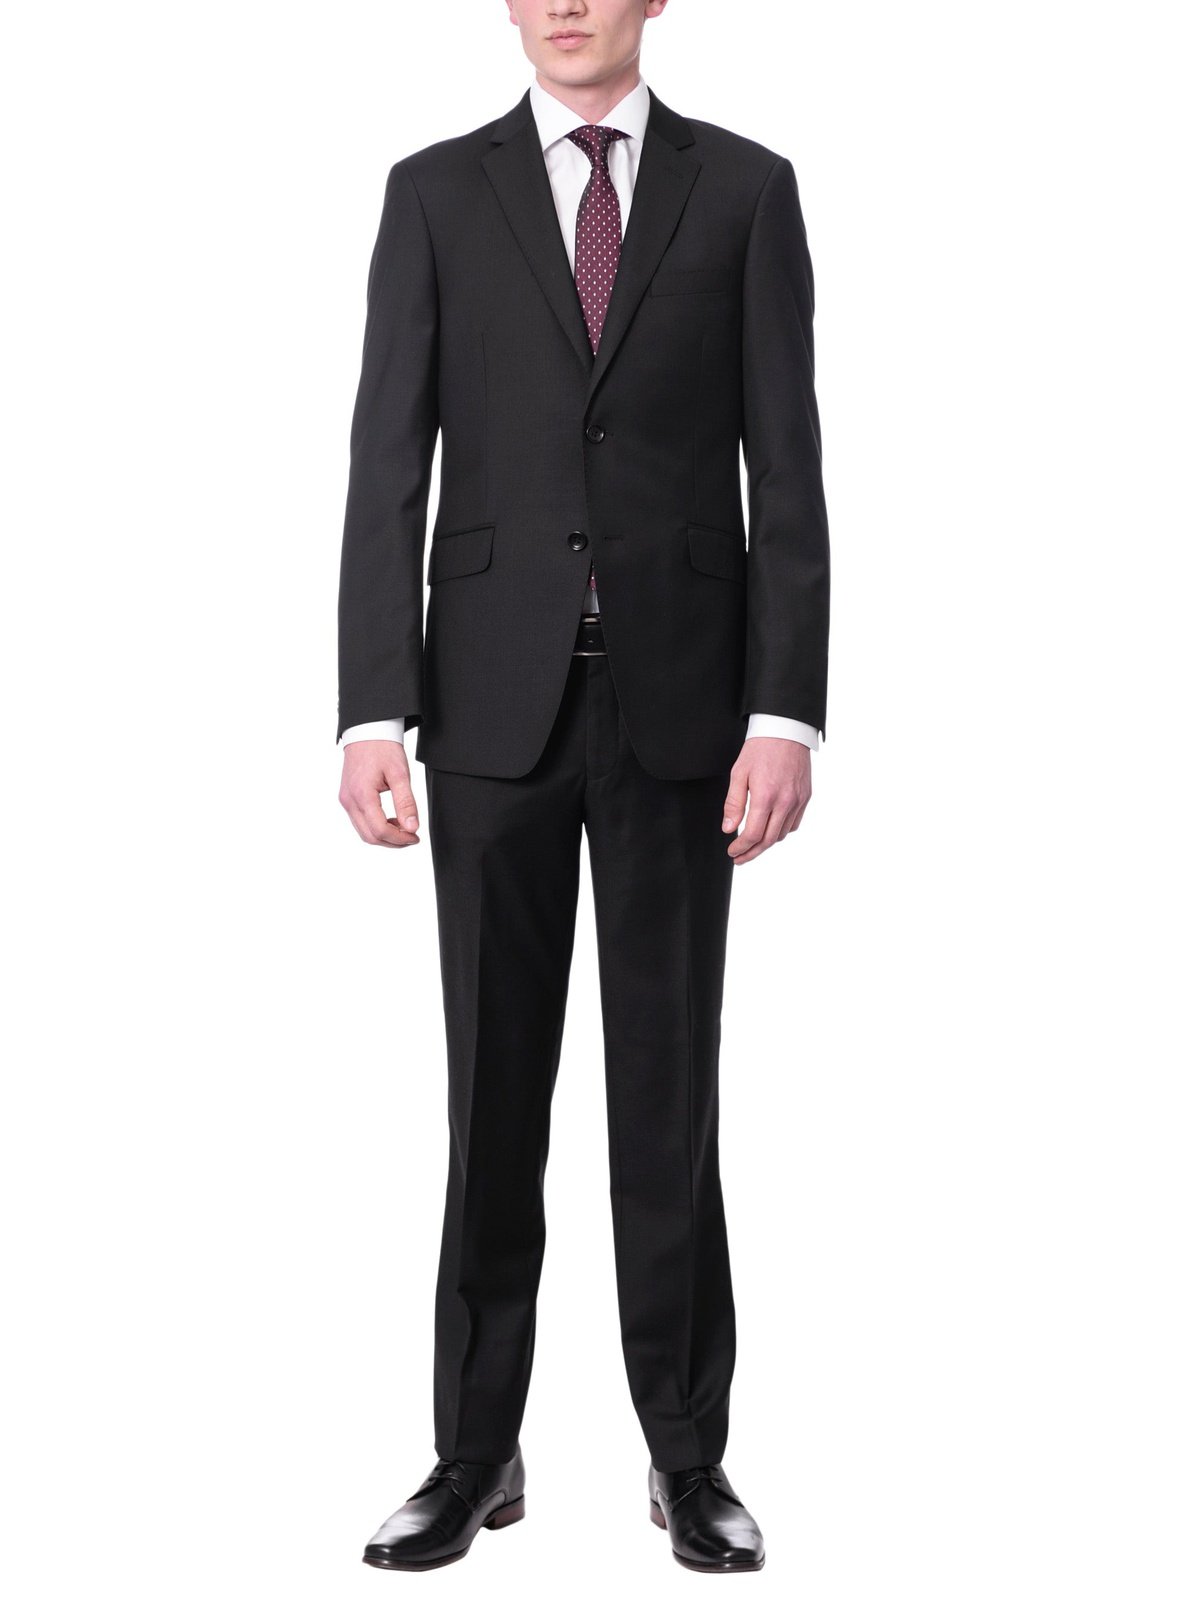 Label M Bestselling Items Men's Euro Slim Fit Solid Black Two Button 2 Piece 100% Wool Suit